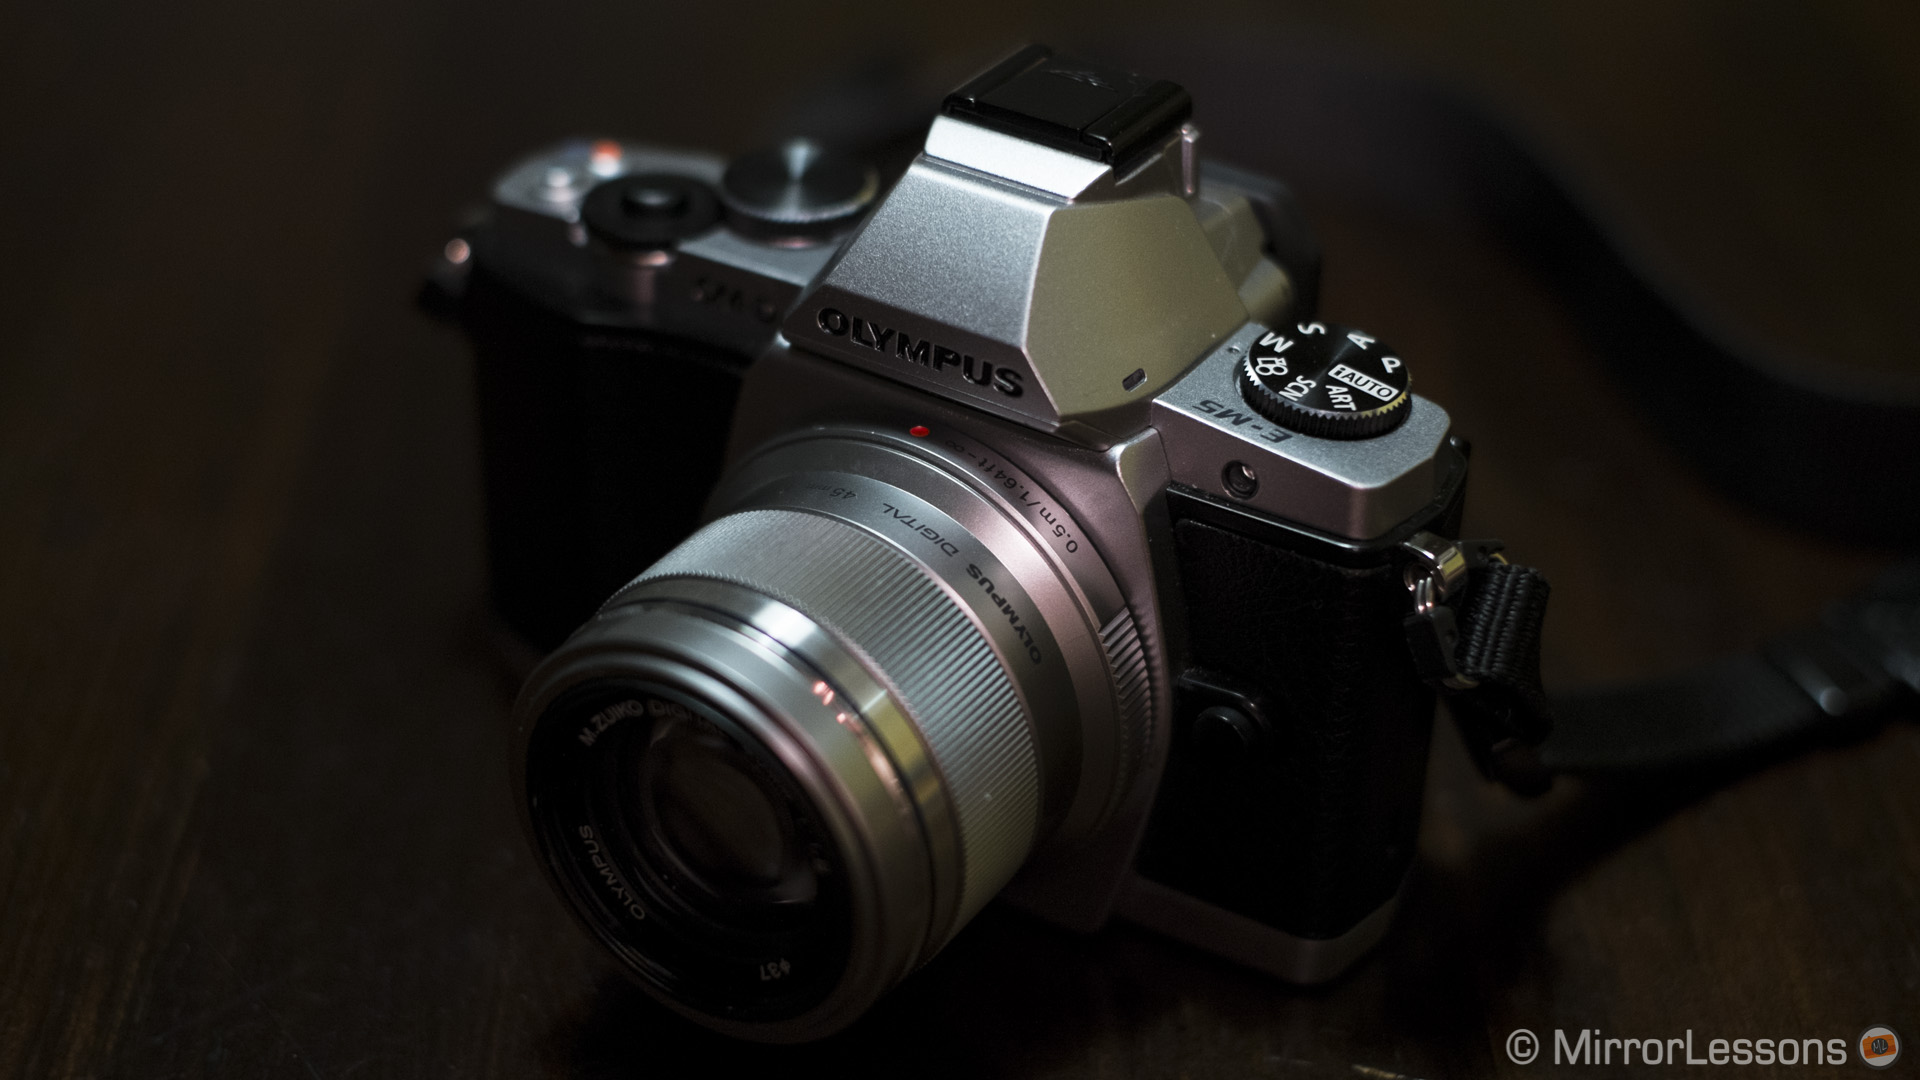 Olympus M.Zuiko 45mm f/1.8 Review: The best portrait lens for